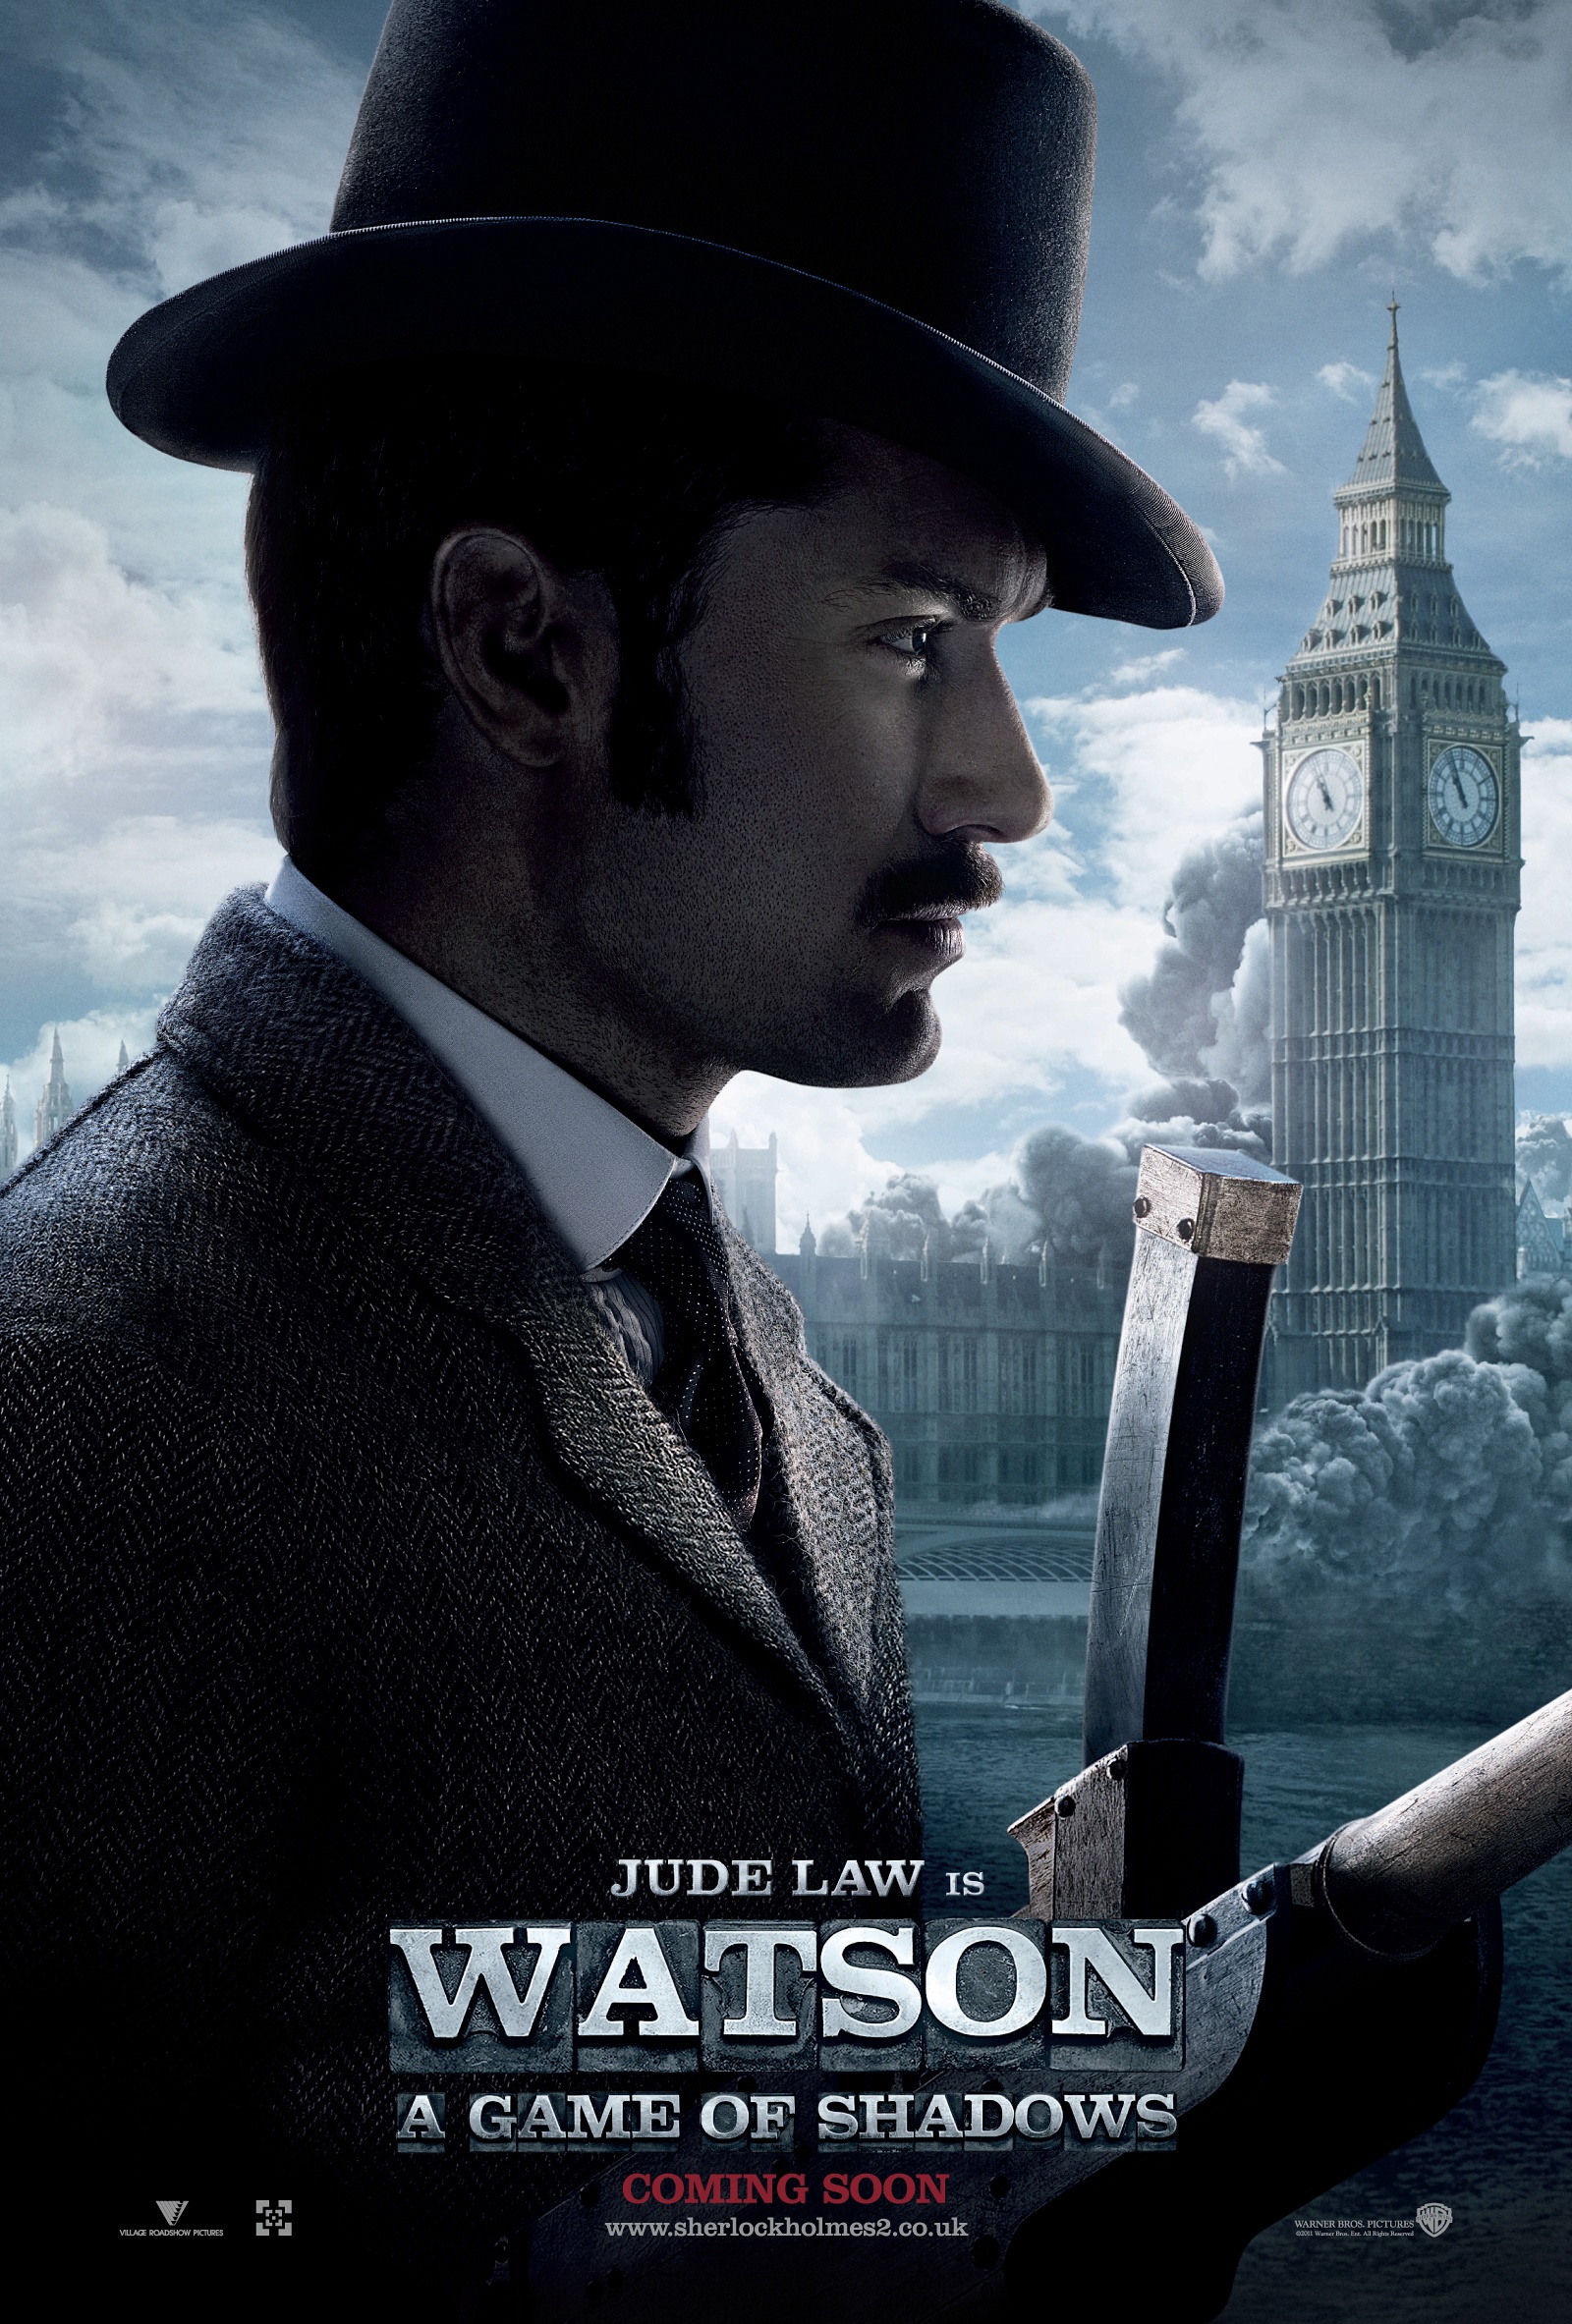 New trailer and posters for Sherlock Holmes: A Game of Shadows